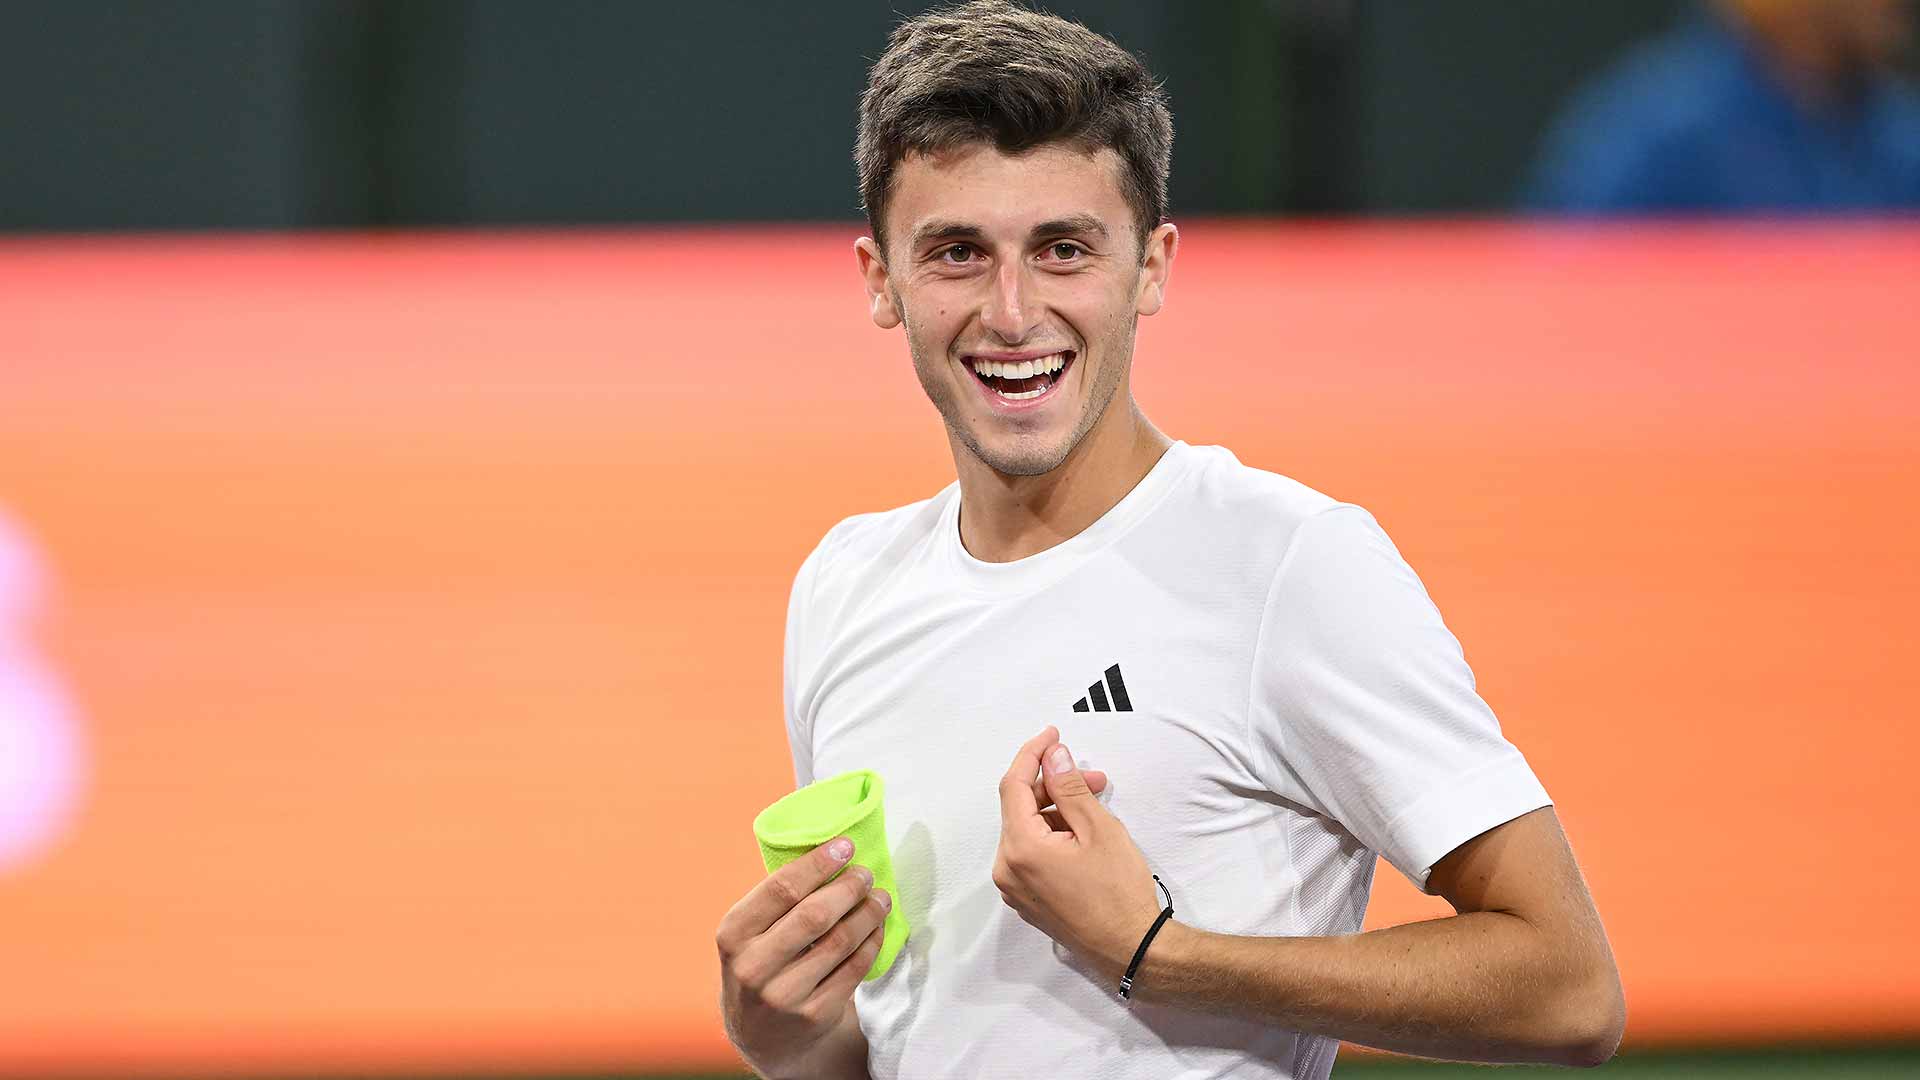 World No. 123 Luca Nardi becomes the lowest-ranked player to defeat Novak Djokovic at an ATP Masters 1000 tournament.